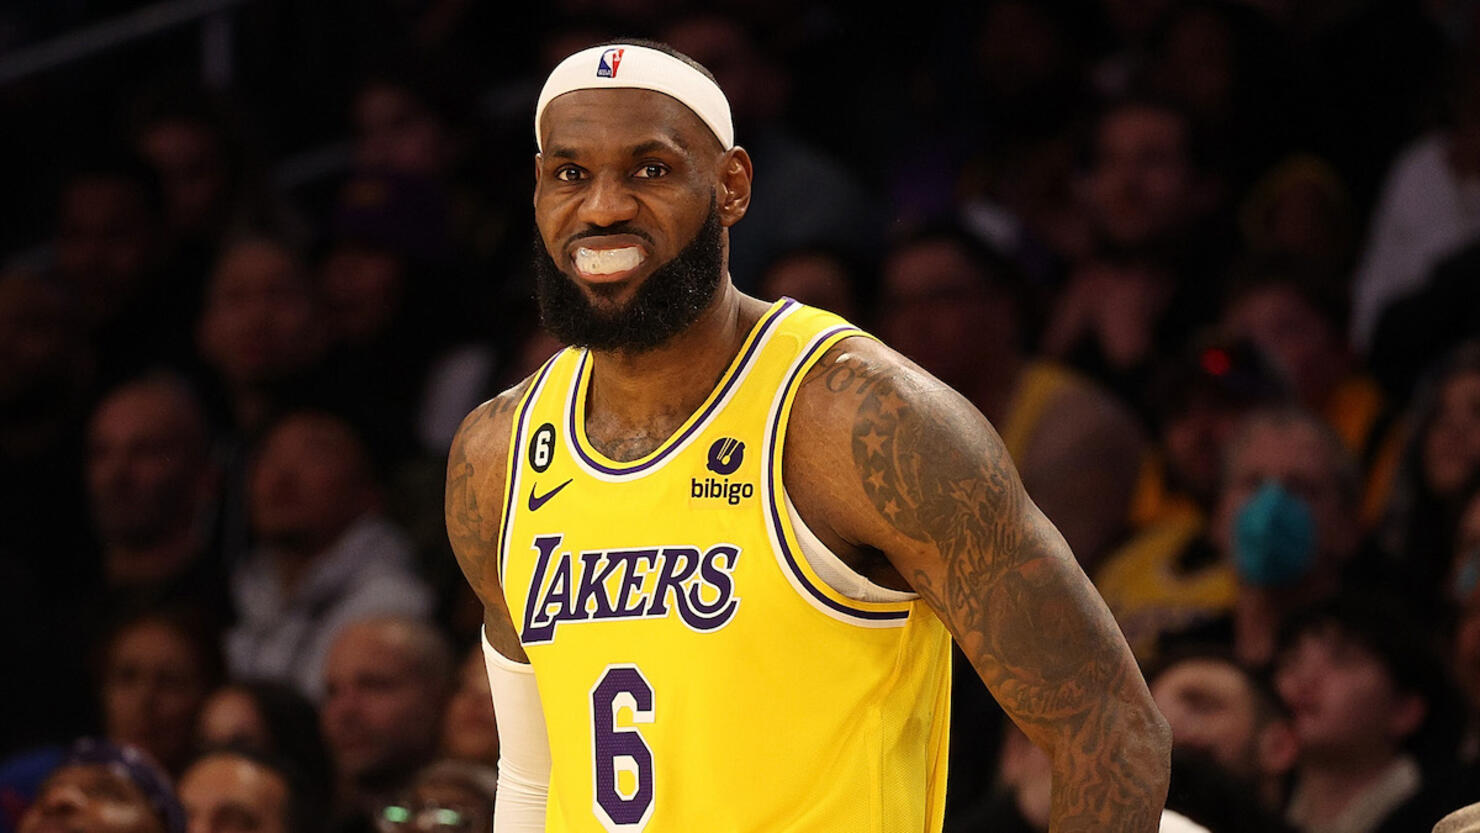 LeBron James breaks NBA scoring record with his 38,388th point